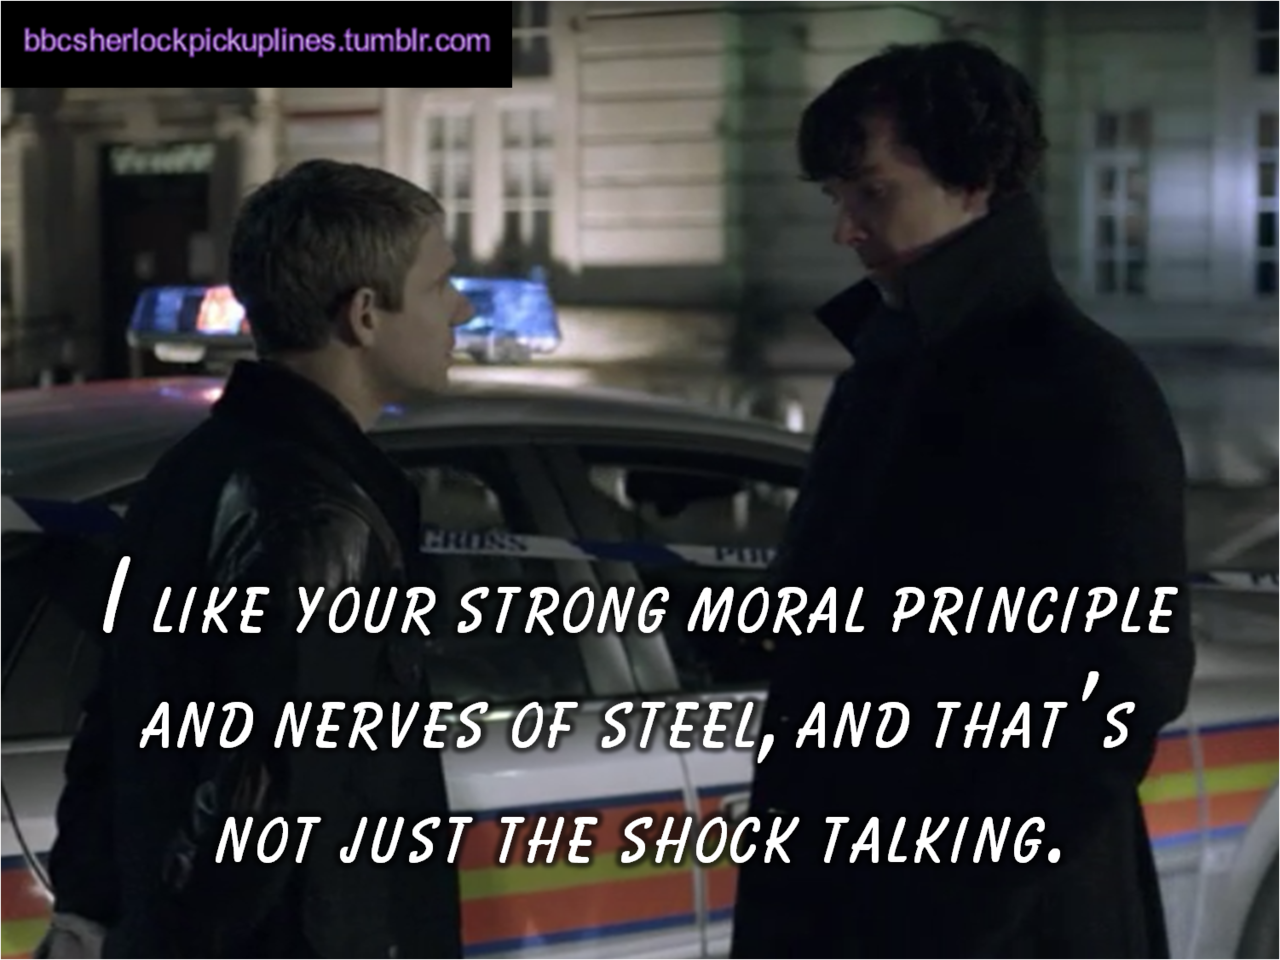 &ldquo;I like your strong moral principle and nerves of steel, and that&rsquo;s